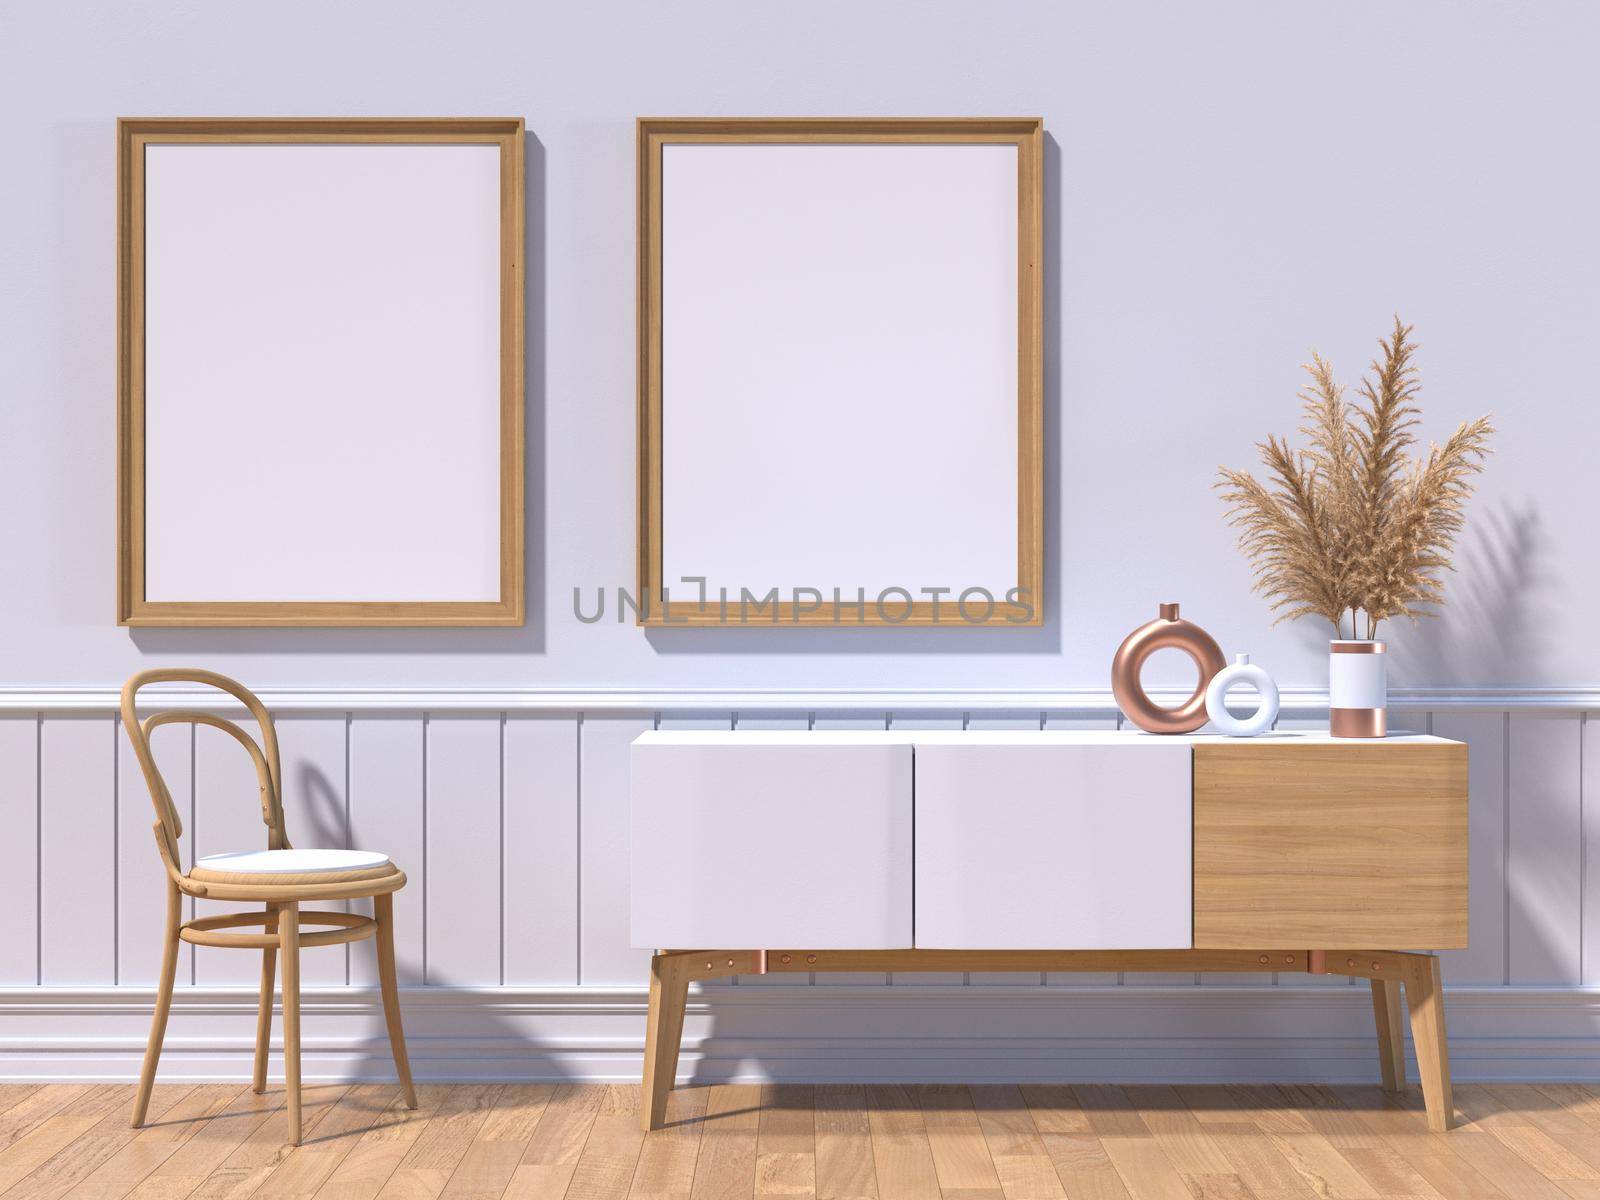 Mock up poster frames with wooden chair and dried plant in modern interior background 3D render 3D illustration